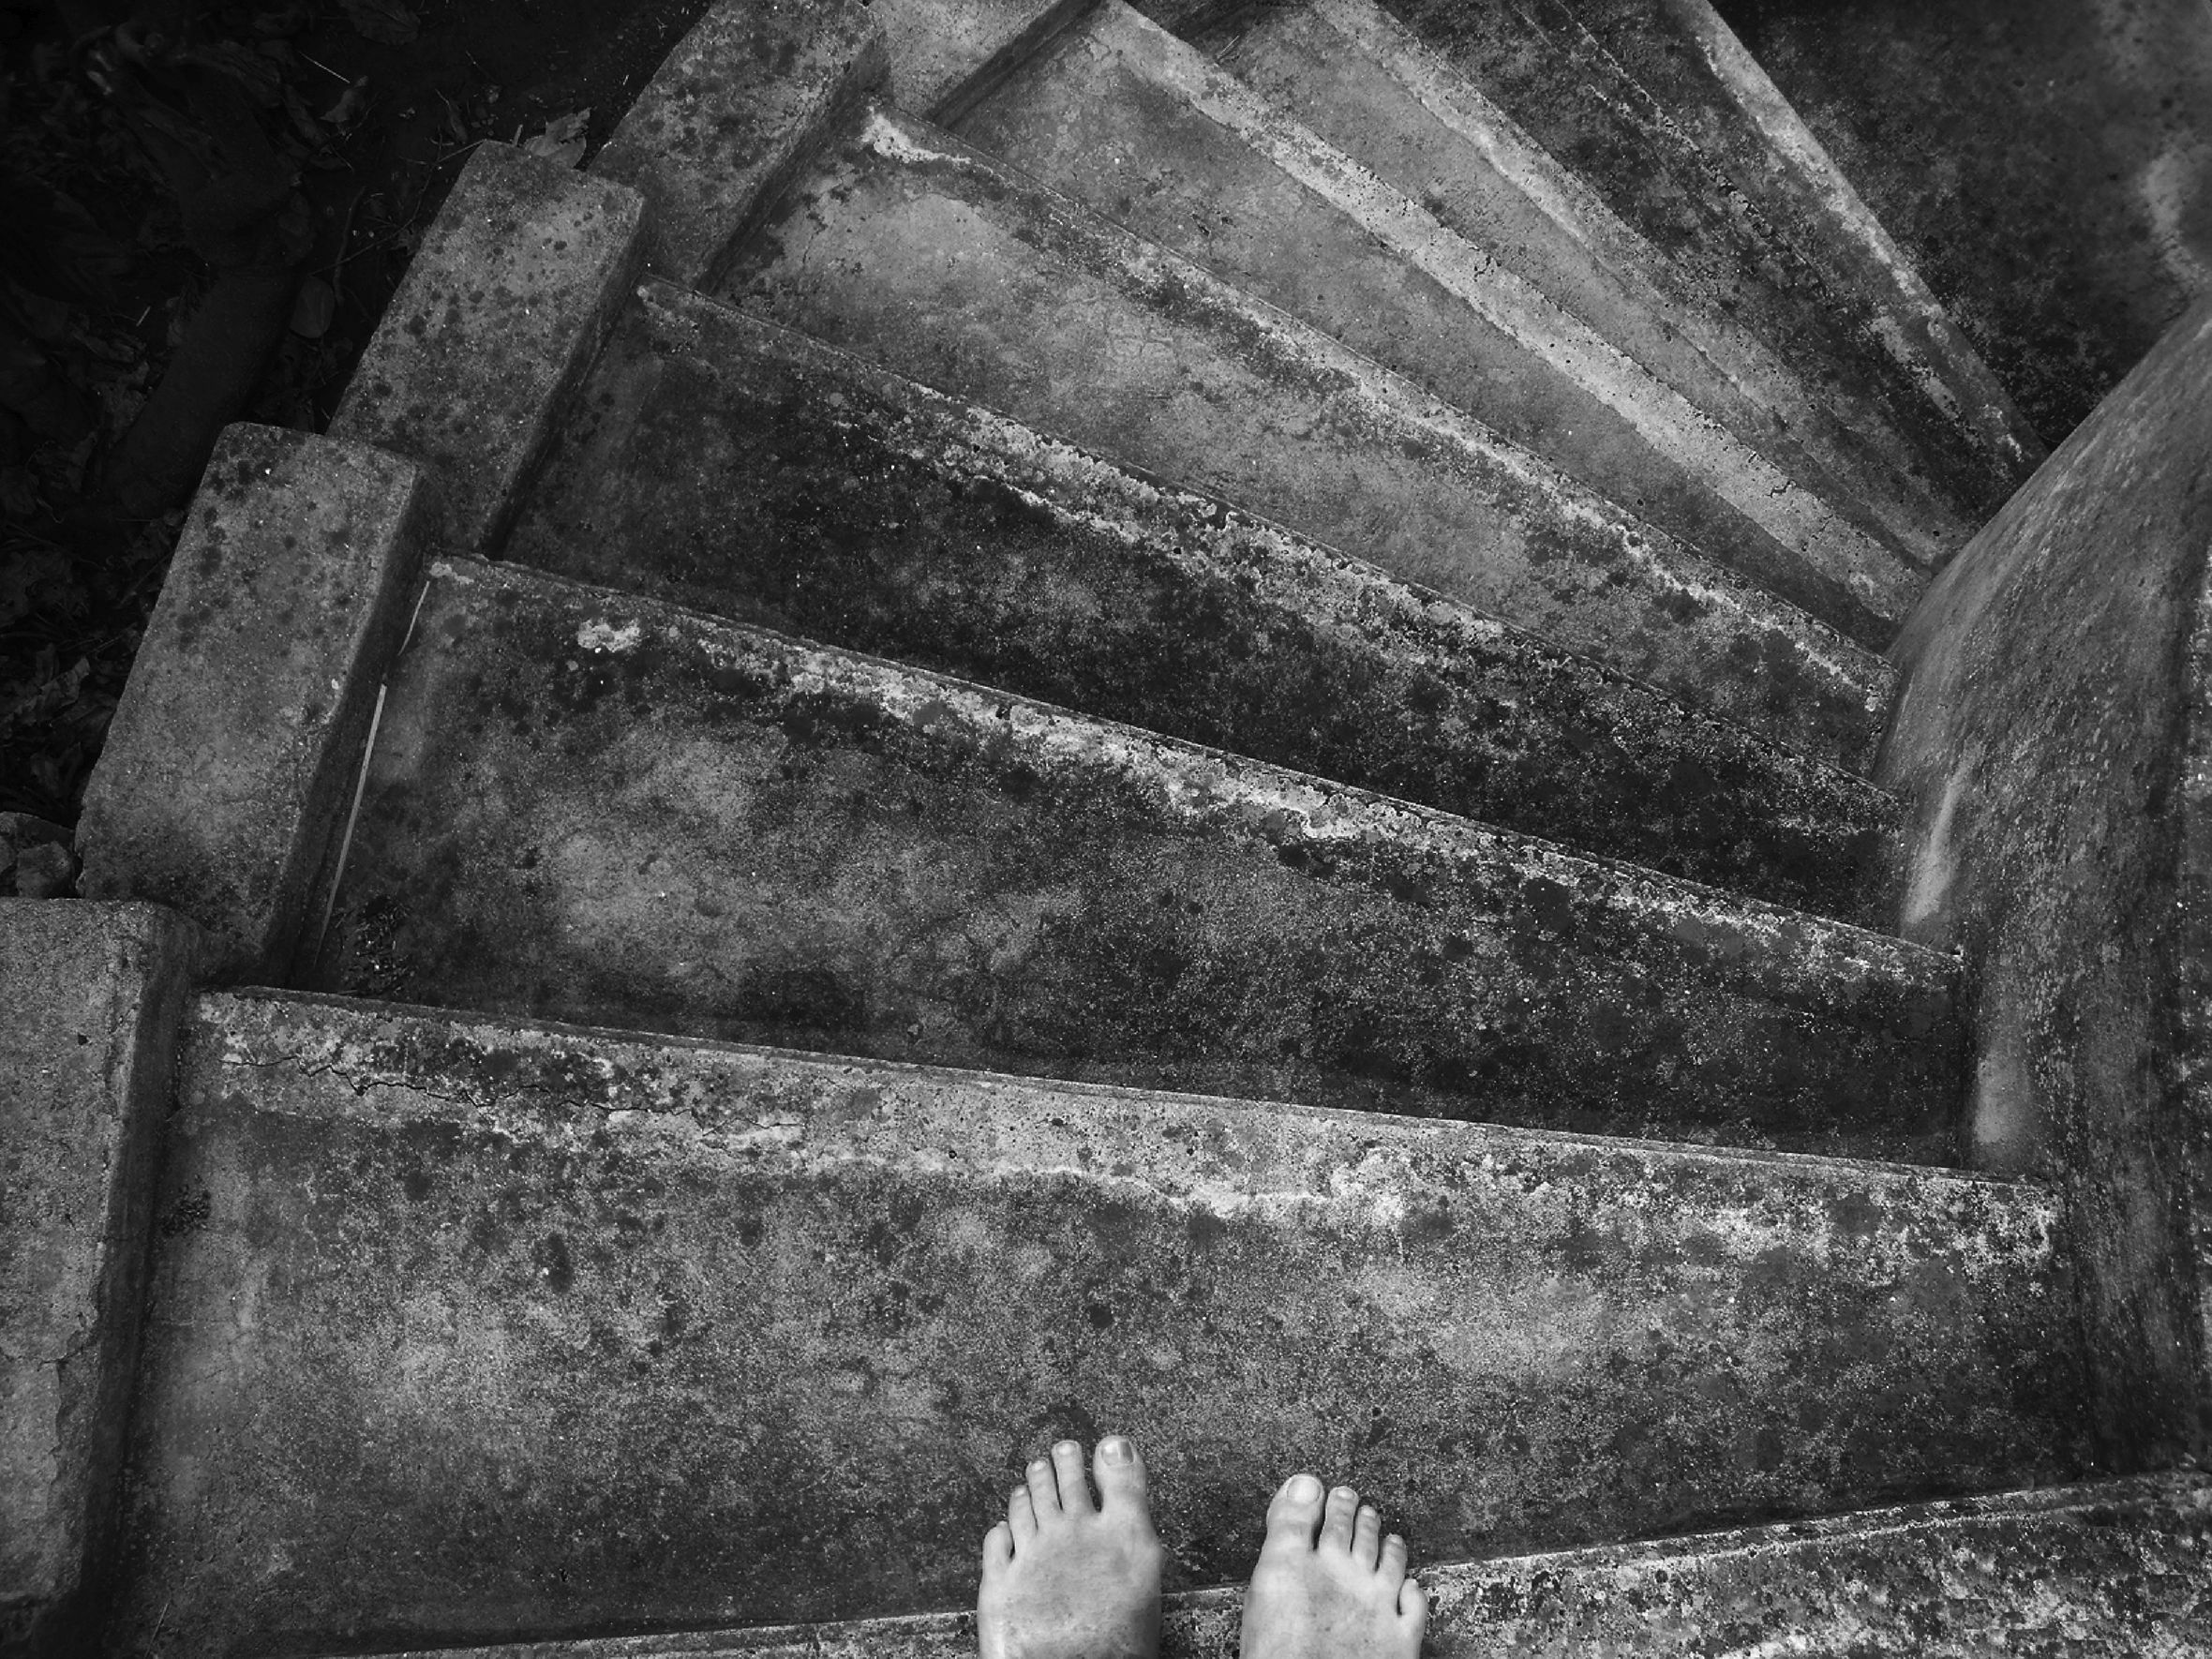 Spiral cement stairway shot from above with bare feet protruding over the top step.